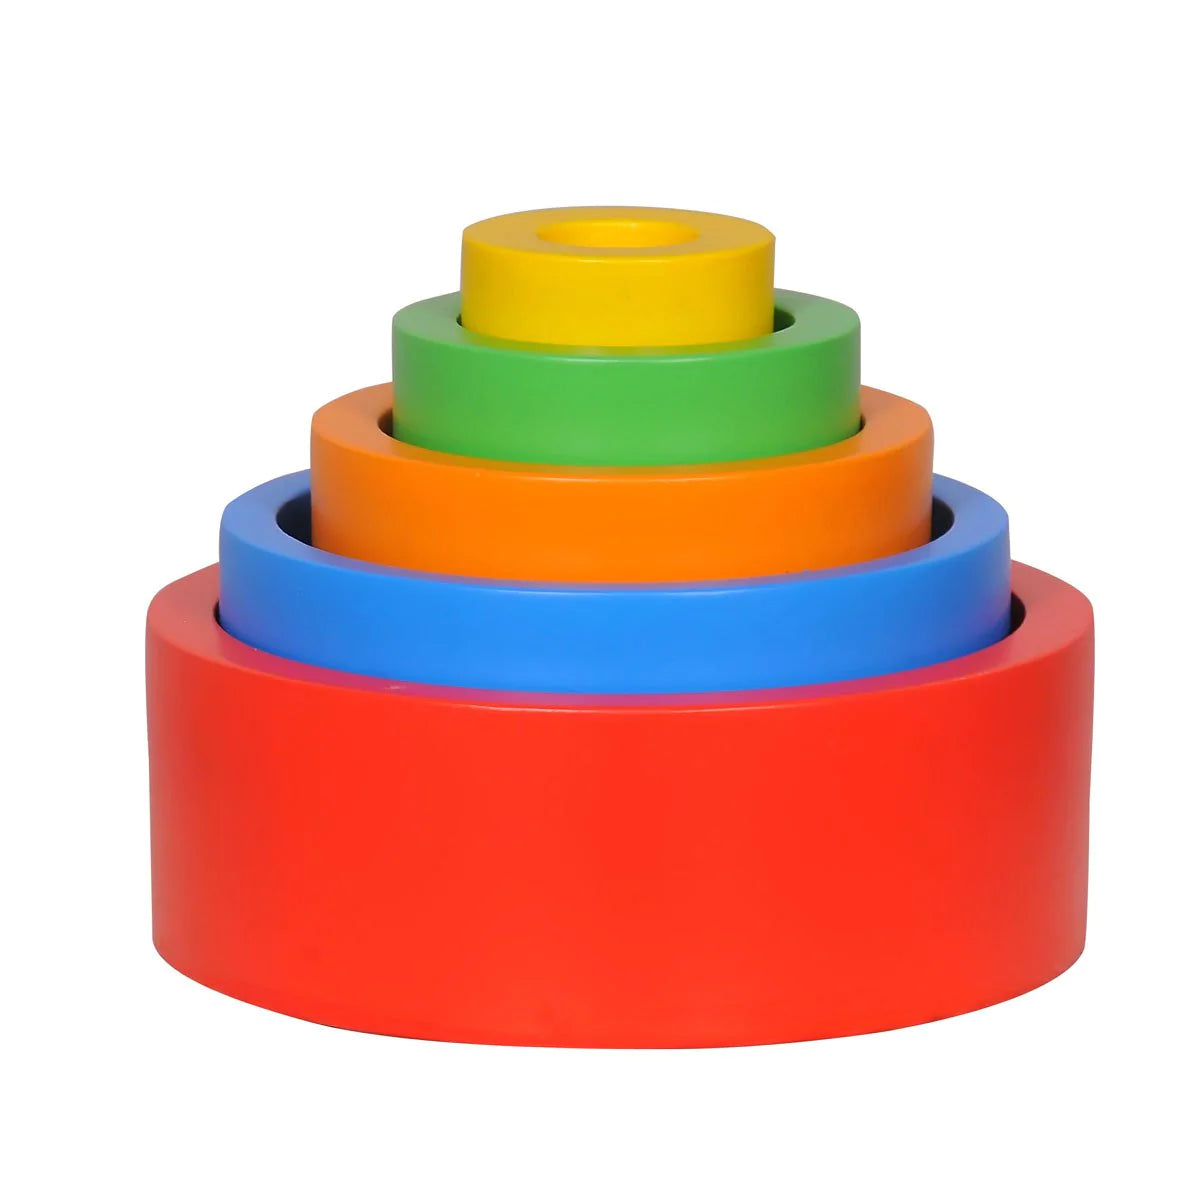 Buy Thasvi Wooden Nesting And Stacking Bowls Toy - SkilloToys.com